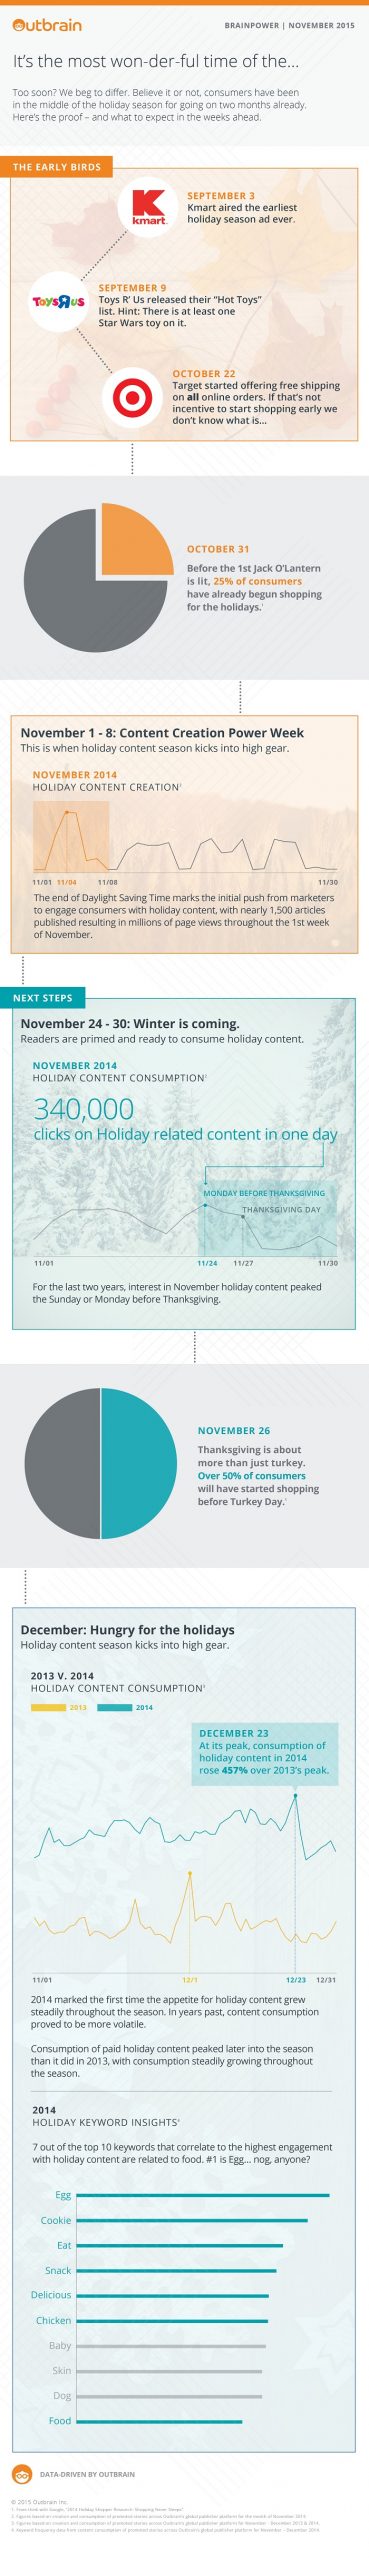 Infographic; 2014 holiday content consumption trends